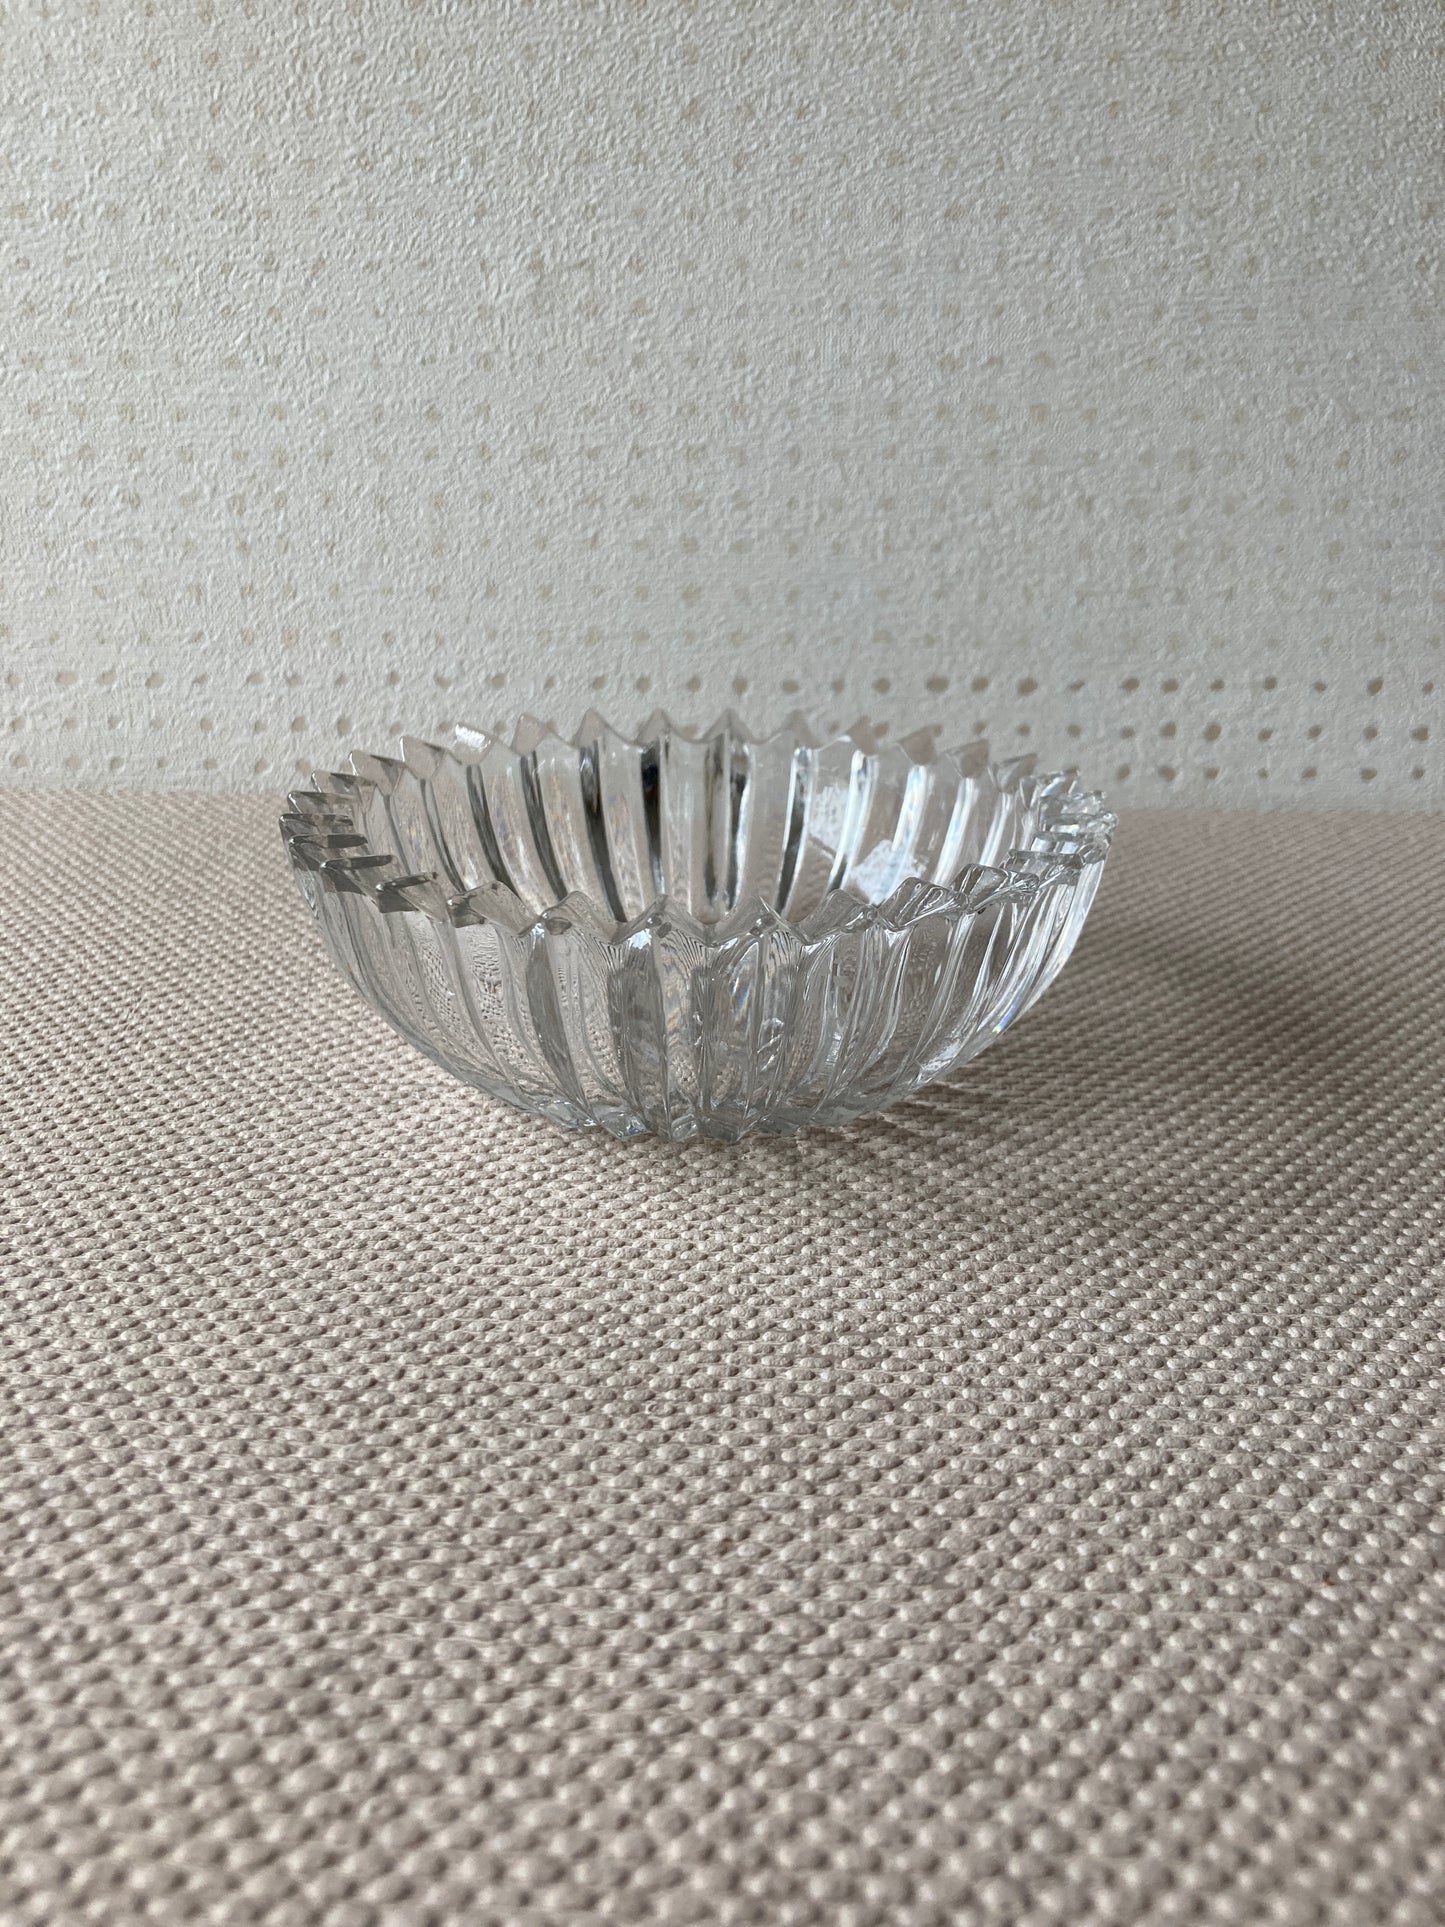 Small Trinket Dish with Serrated Edge